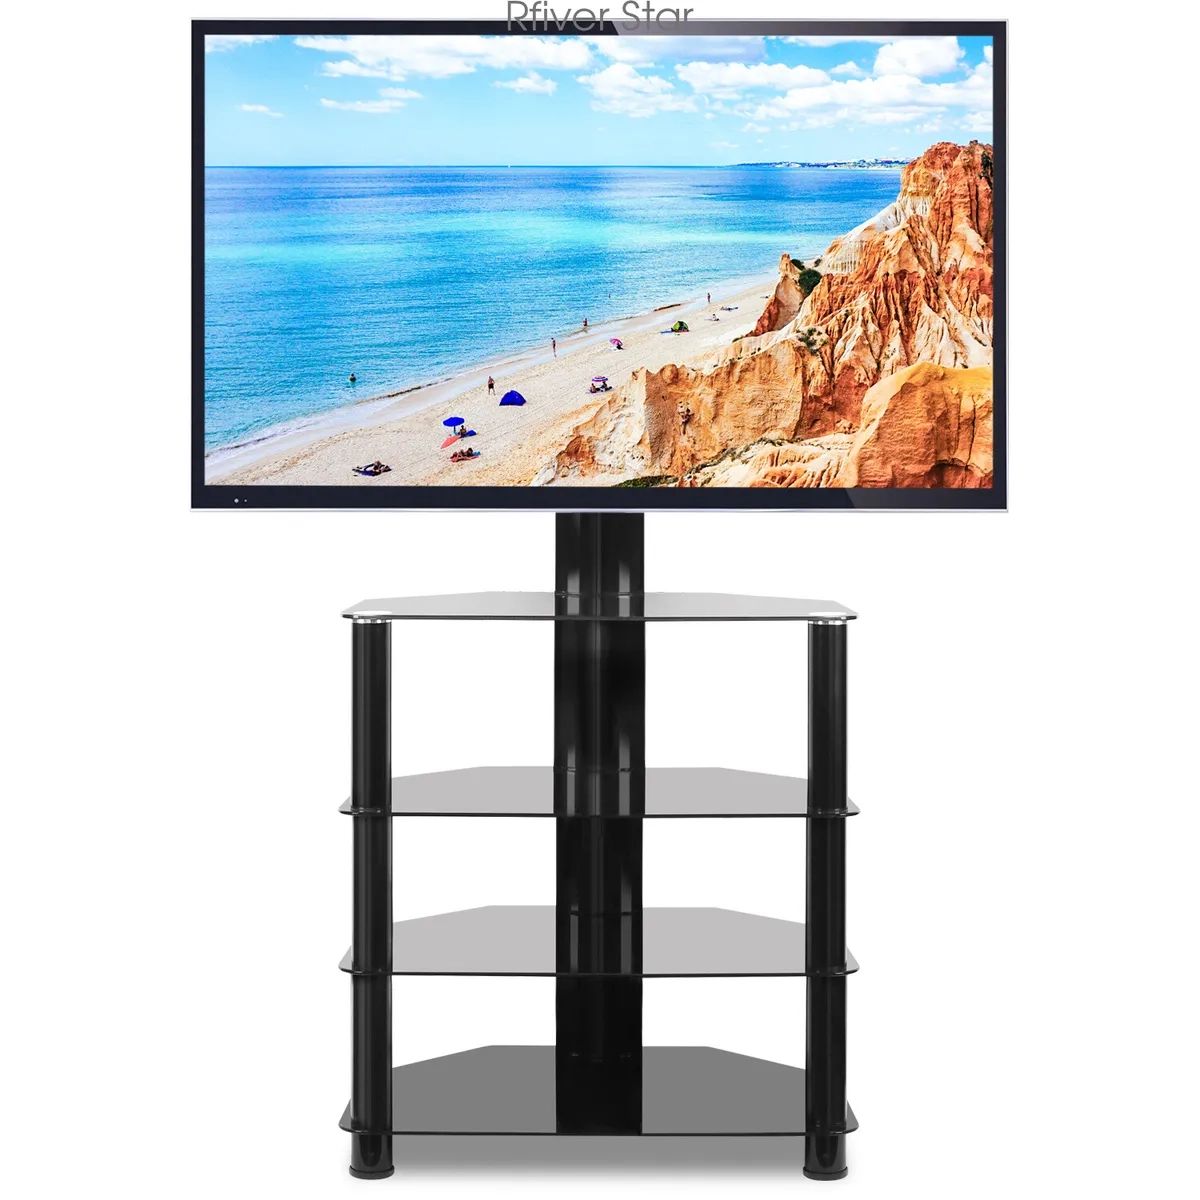 Universal Floor Tv Stand With Swivel Mount And 4 Shelves For 32" 55" Tvs |  Ebay Pertaining To Universal Floor Tv Stands (Photo 3 of 15)